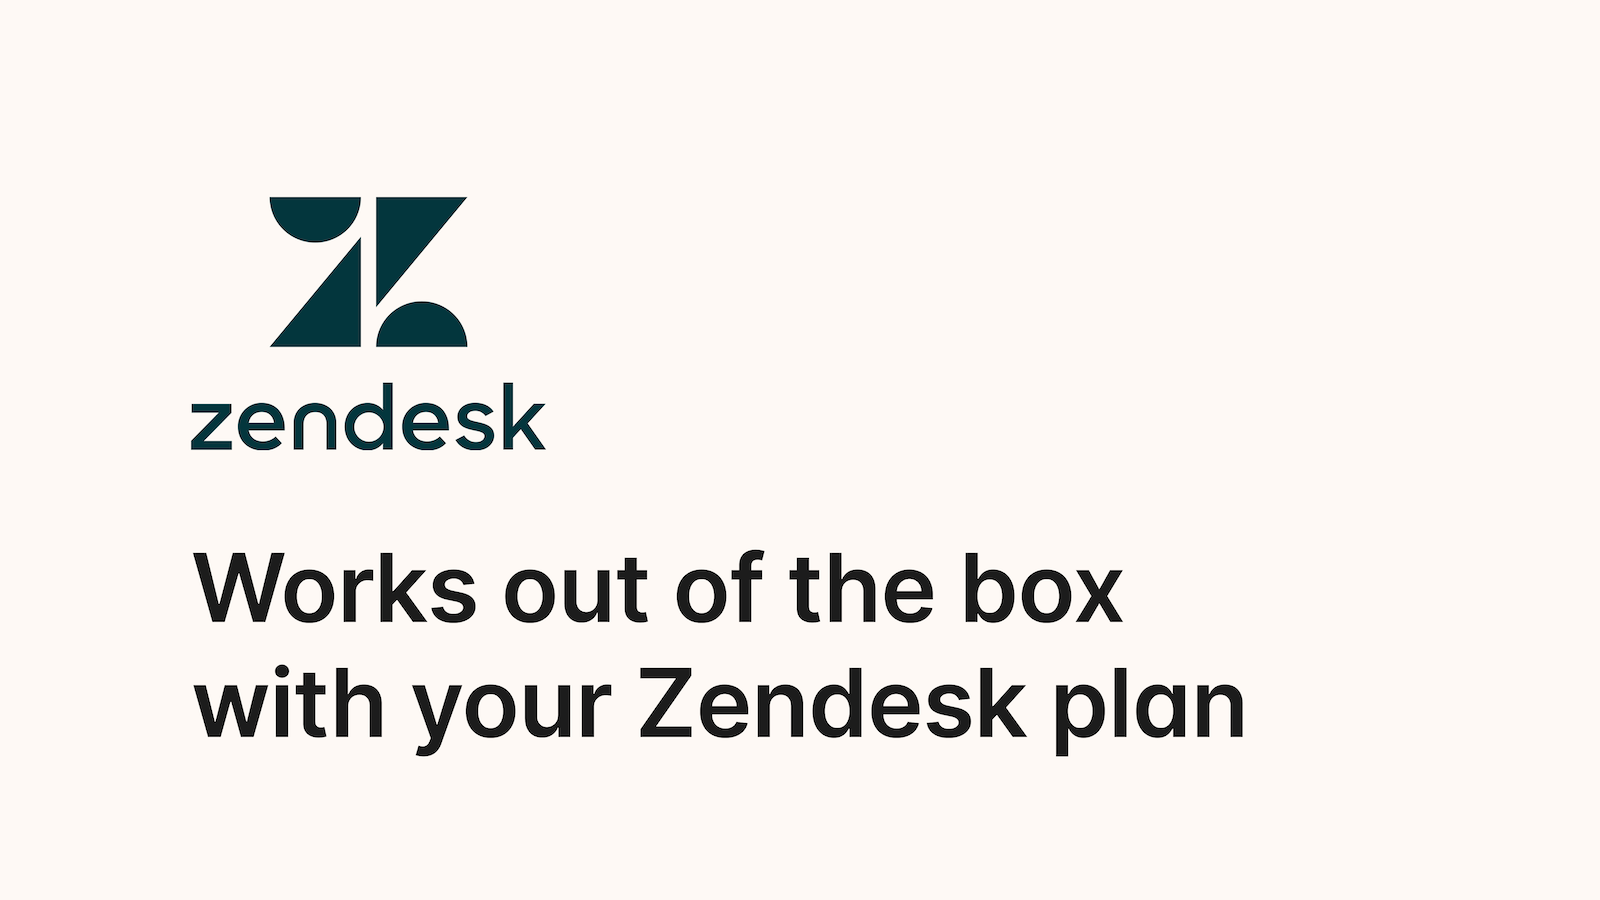 Works out of the box with your Zendesk plan